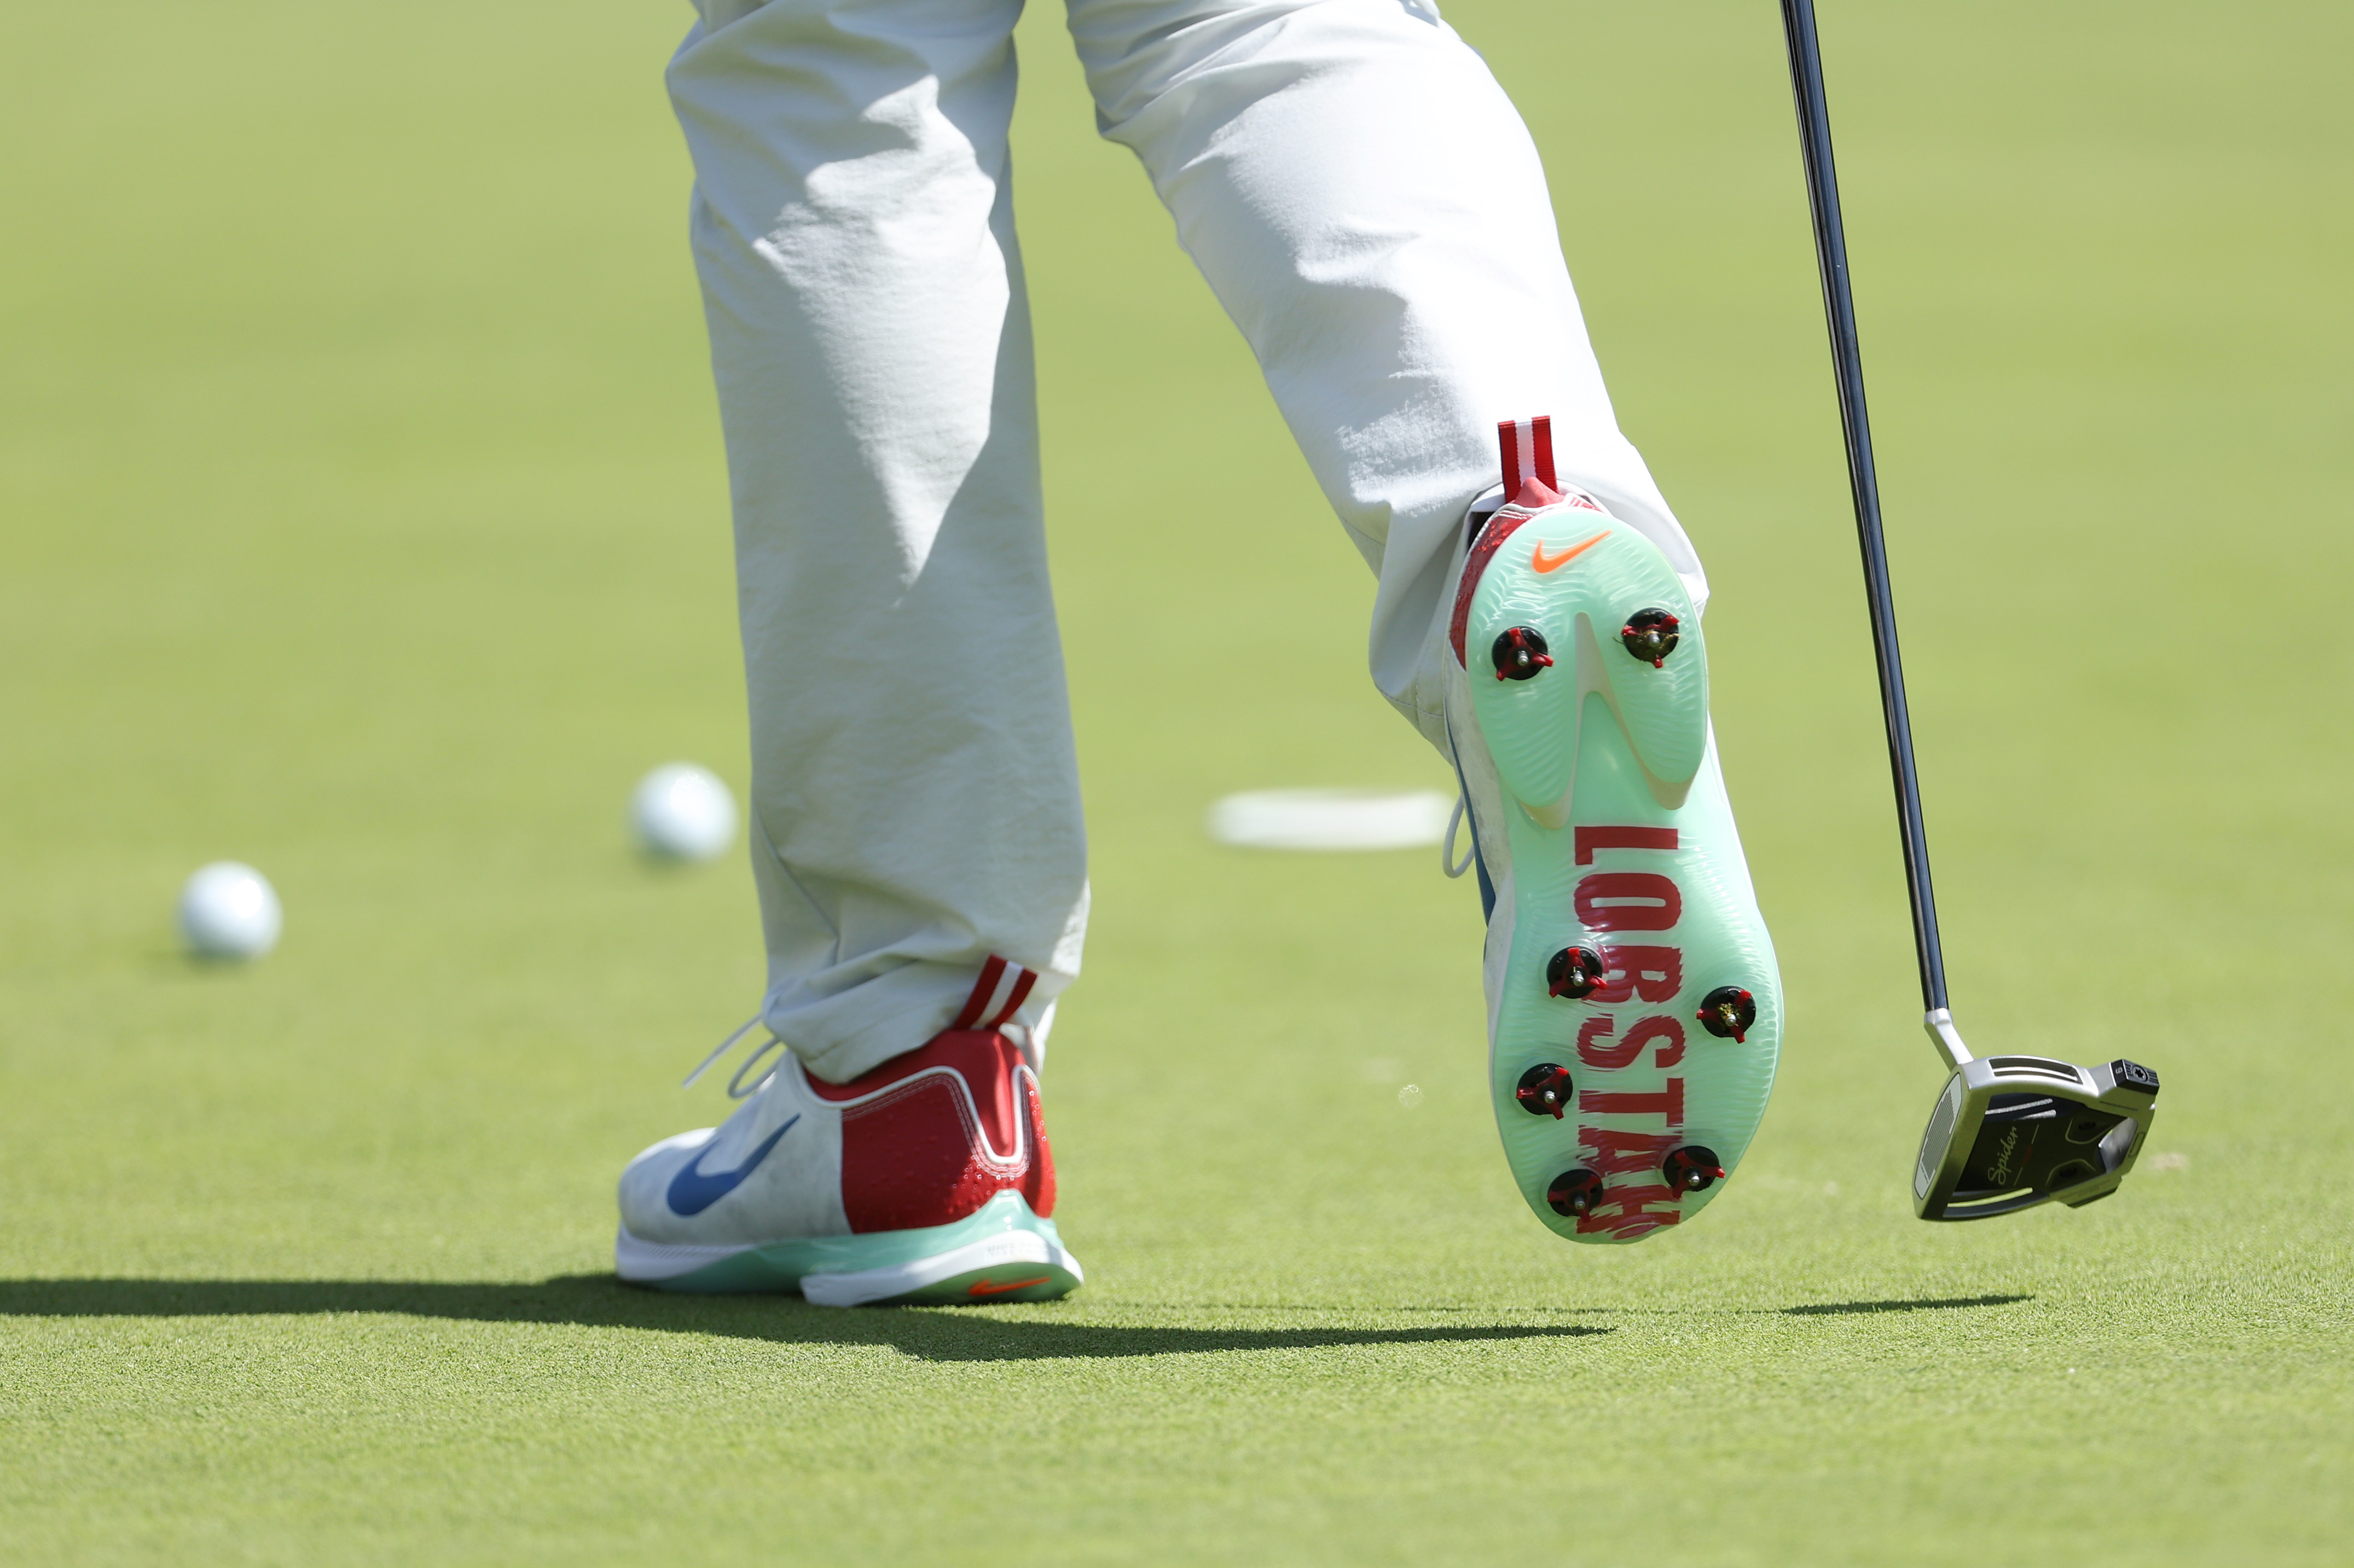 Get the Pro Look with Nike Rory McIlroy Golf Shoes